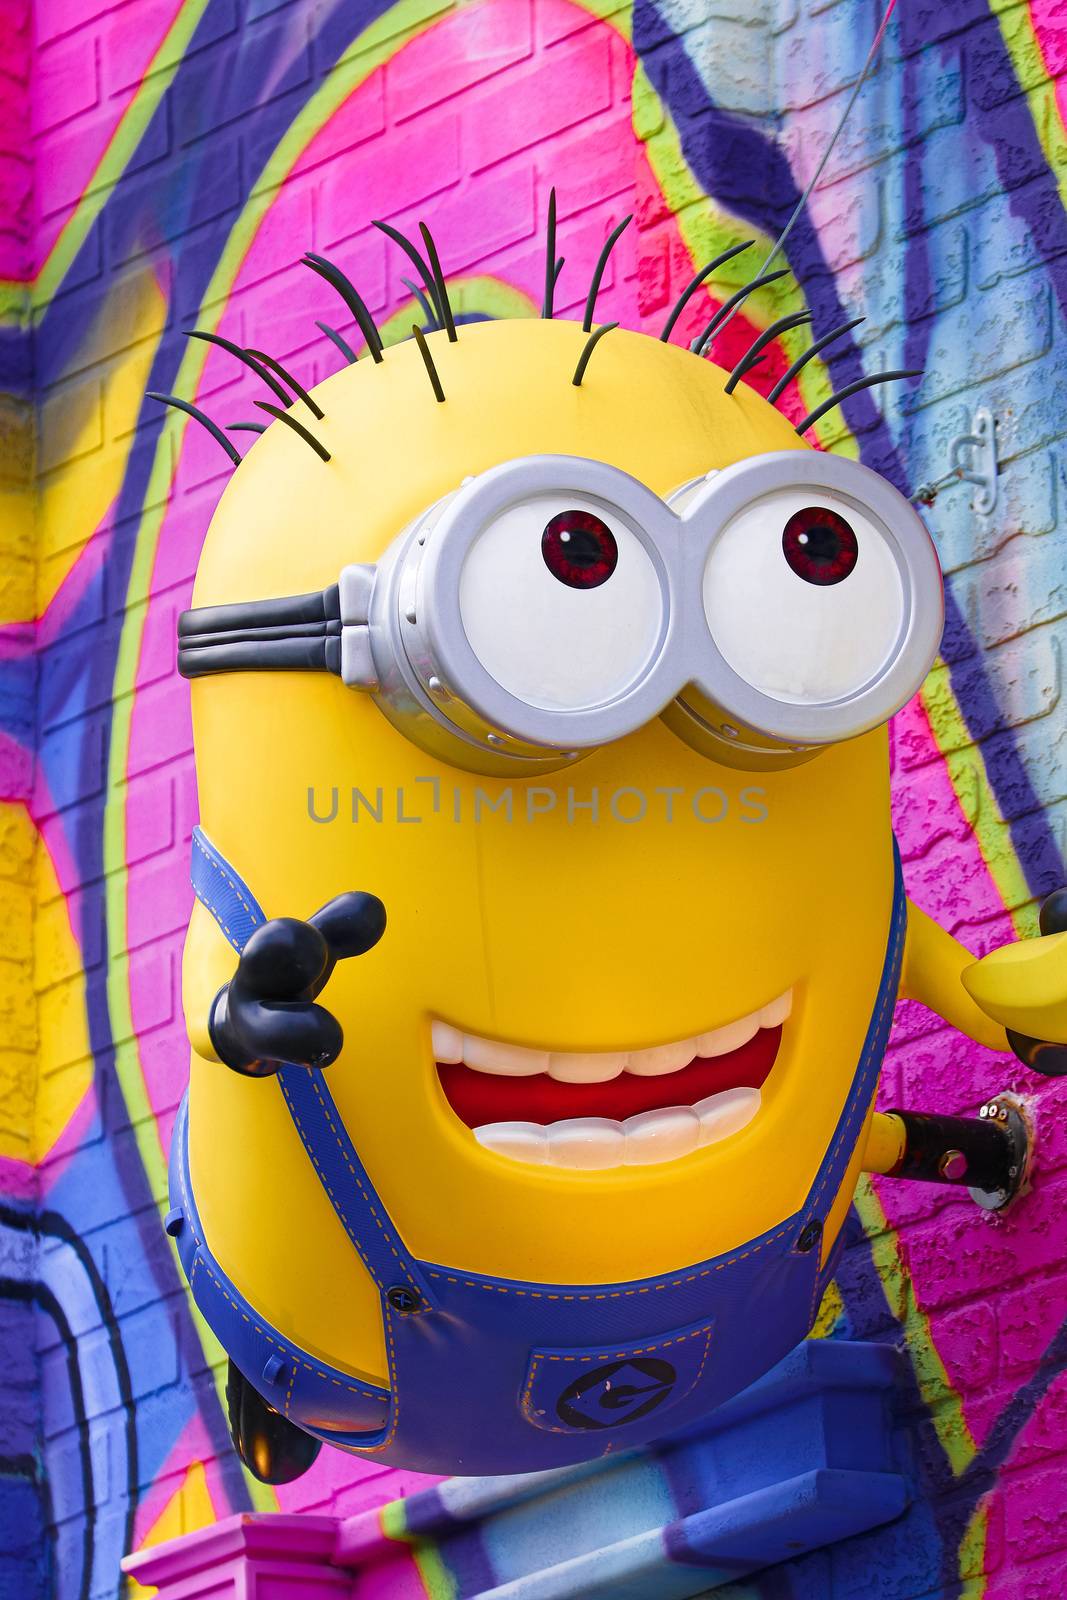 Statue of "HAPPY MINION", located in Universal Studios Japan by USA-TARO